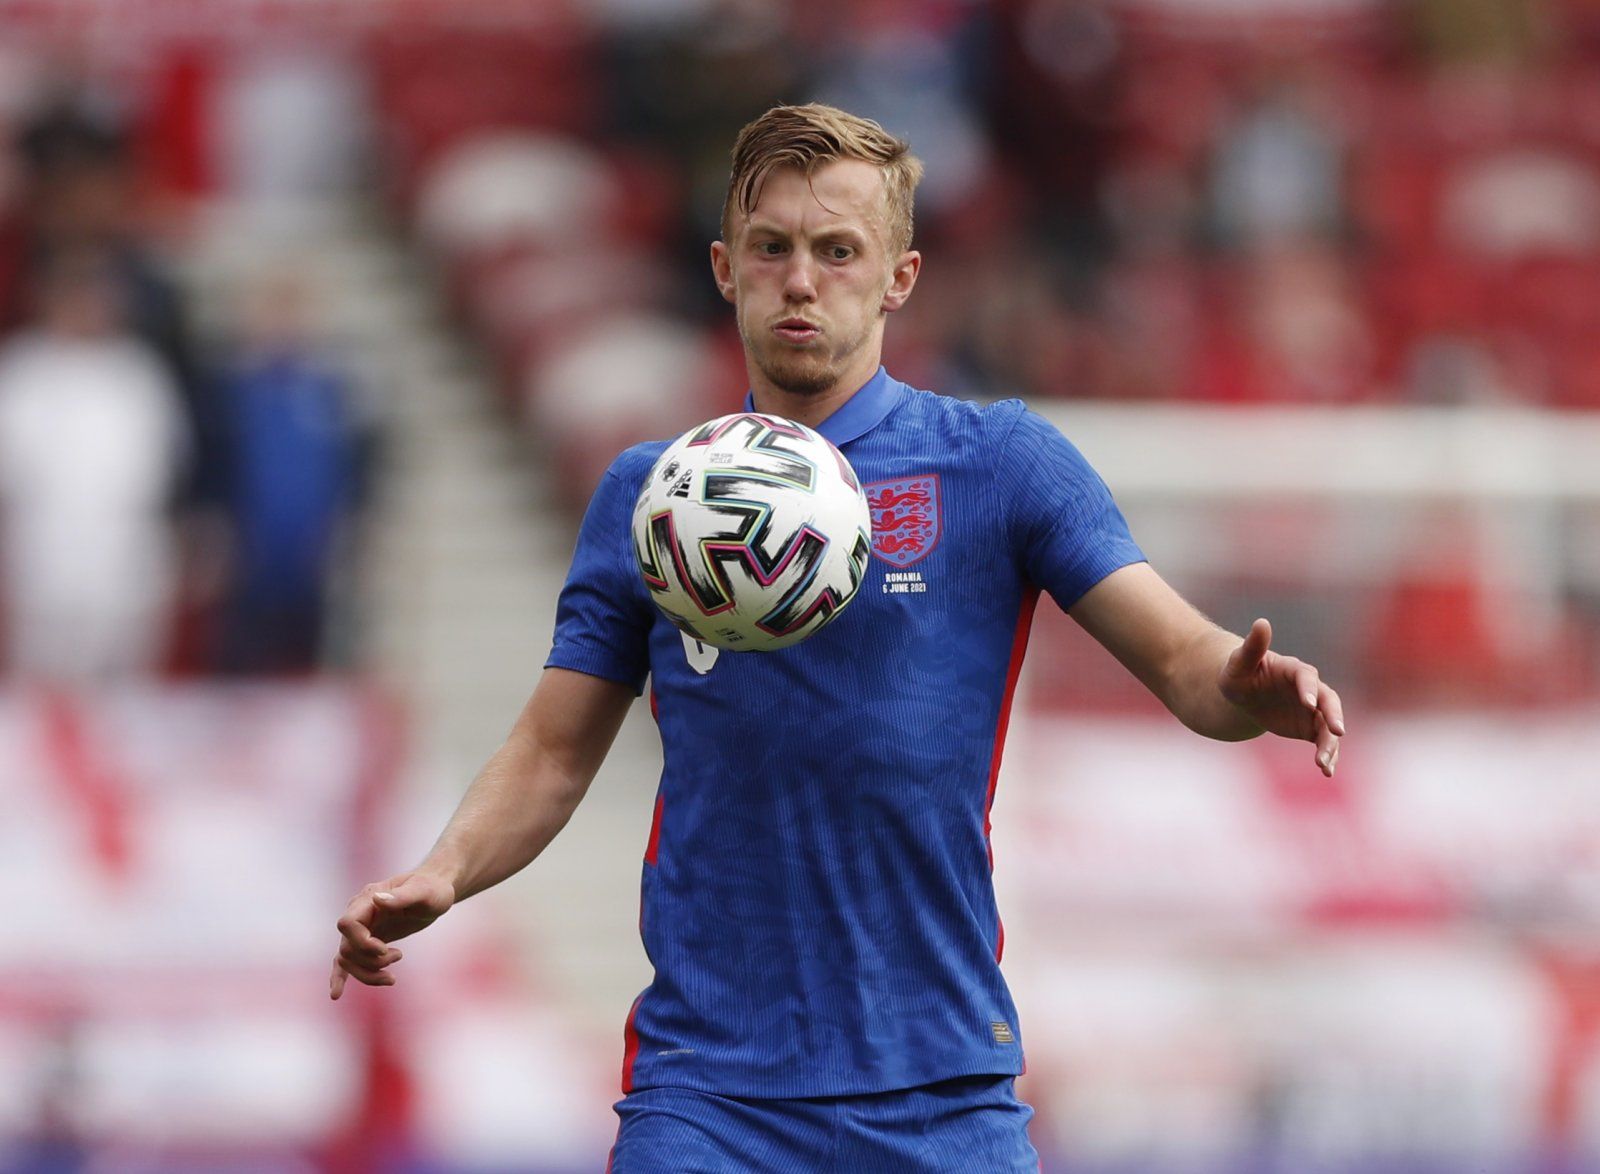 Southampton: James Ward-Prowse could be contemplating St Mary’s exit -Southampton News